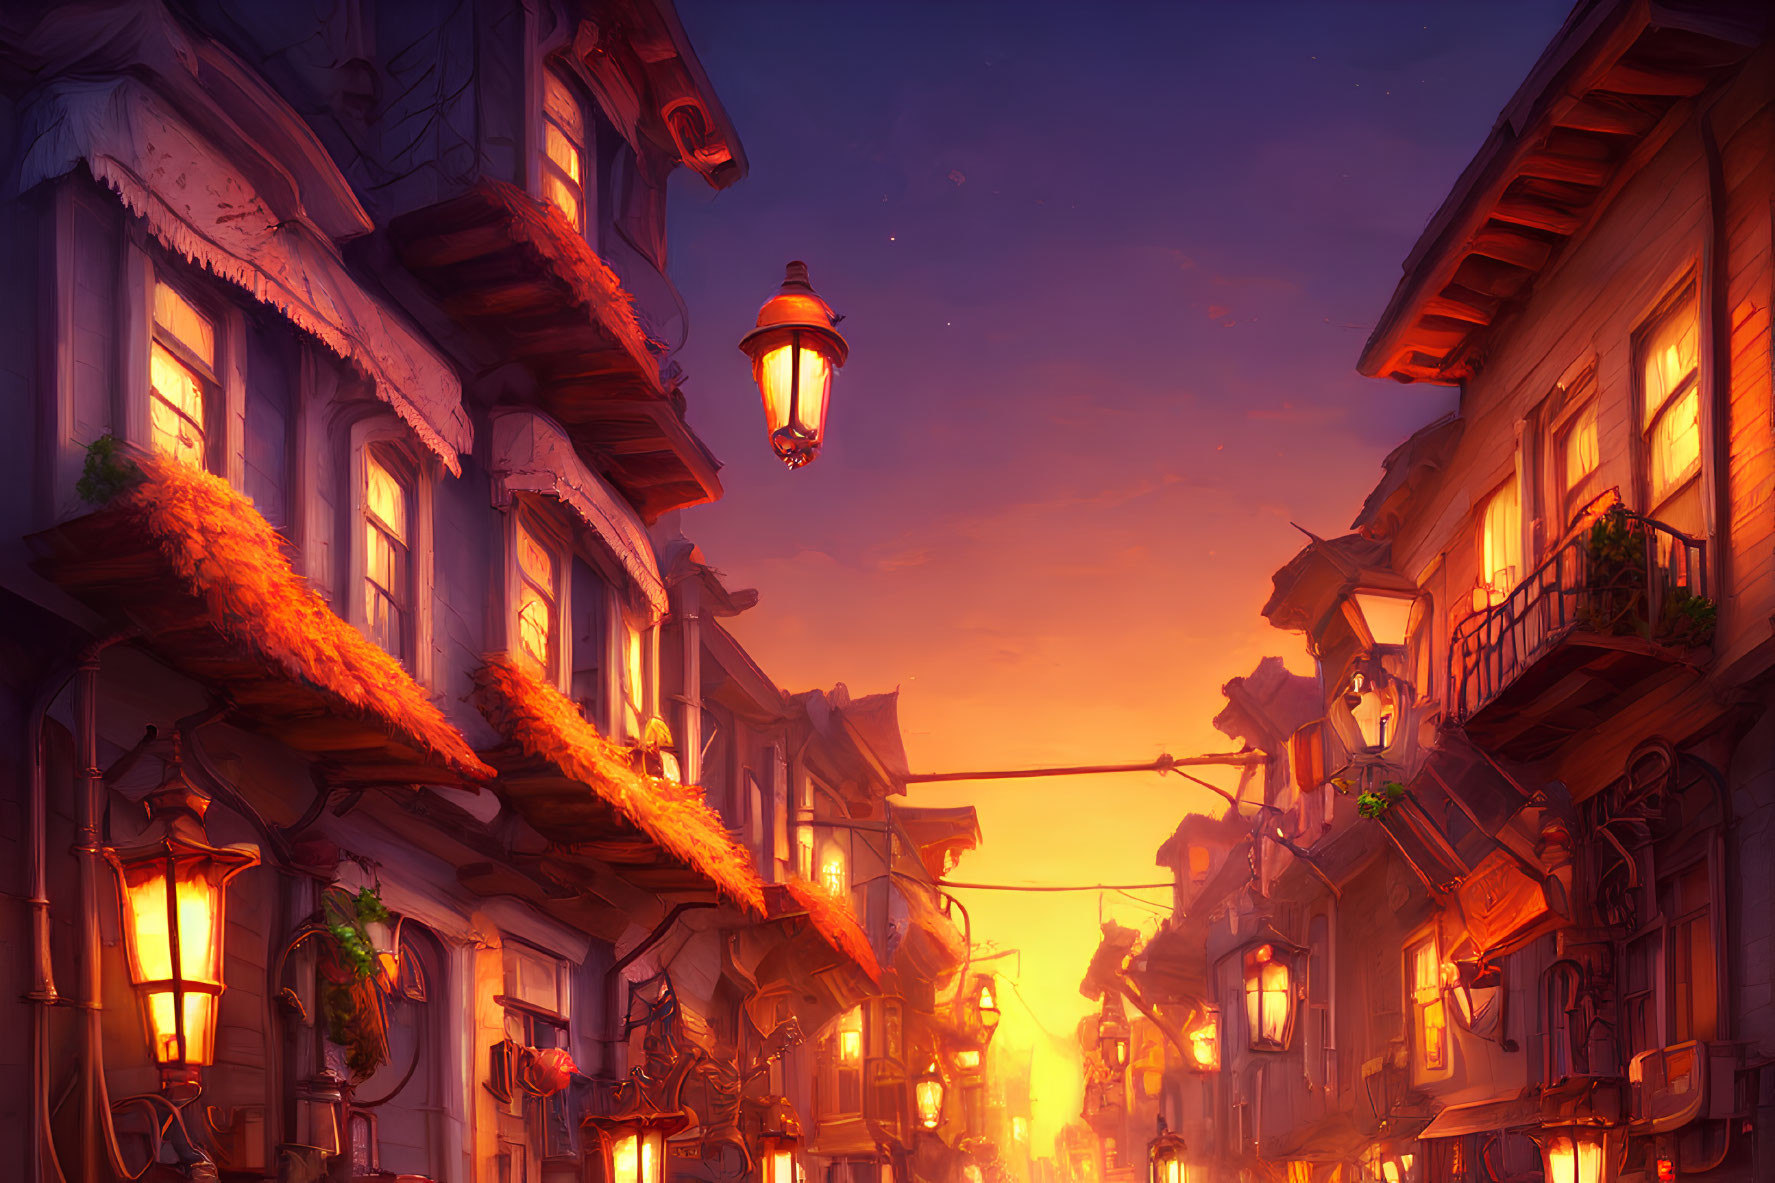 Twilight scene of narrow street with quaint houses and glowing lanterns